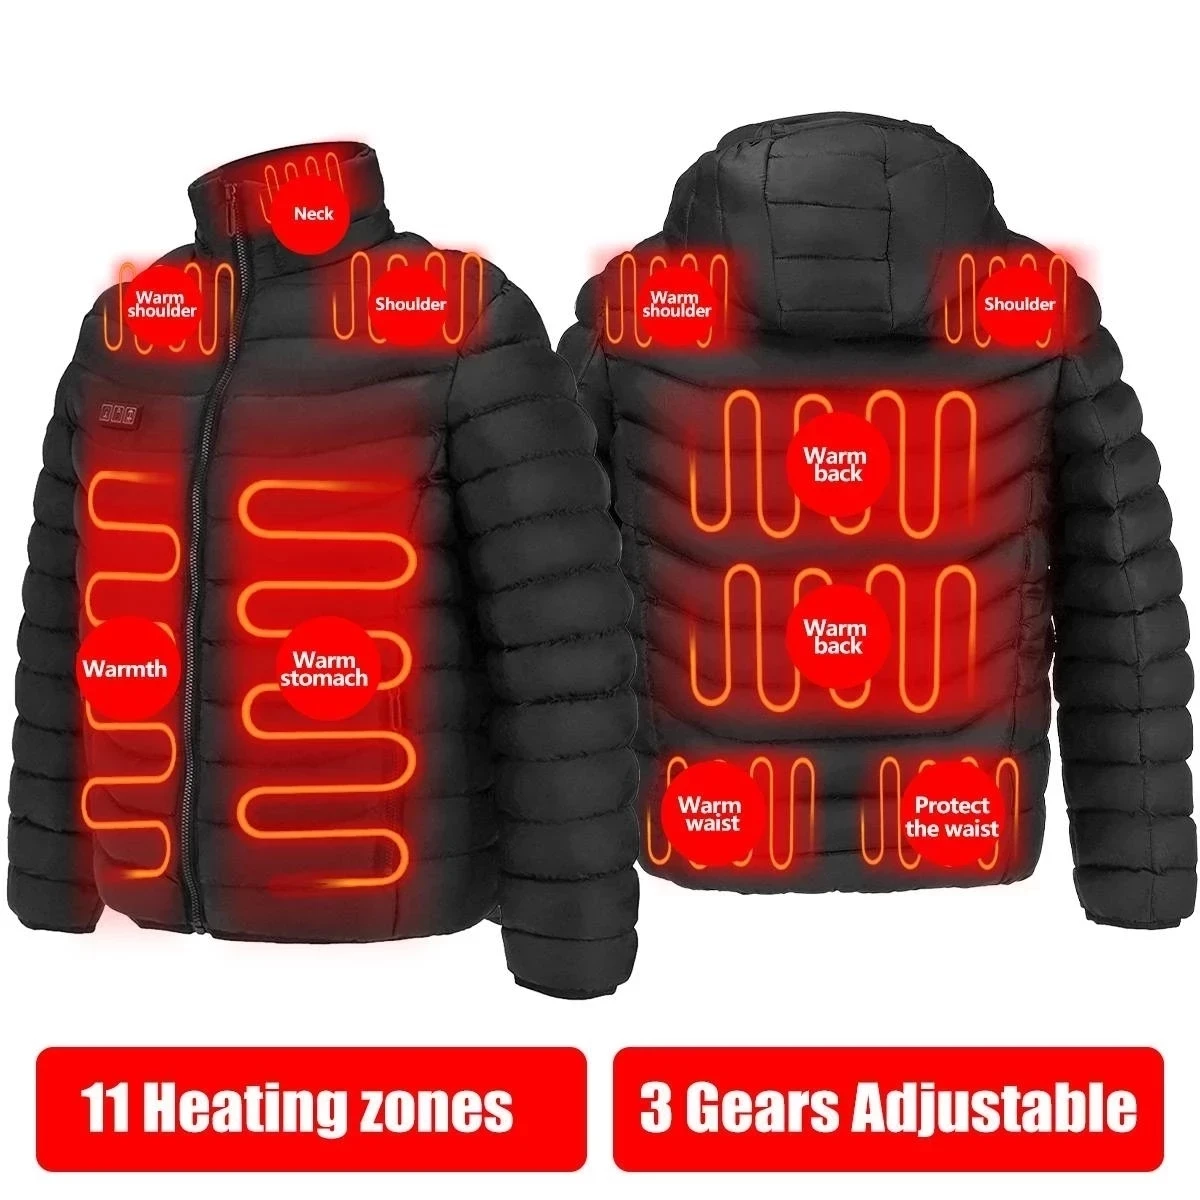 NEW Men Heated Jackets Outdoor Coat USB Electric Battery Long Sleeves Heating Hooded Jackets Warm Winter Thermal Clothing